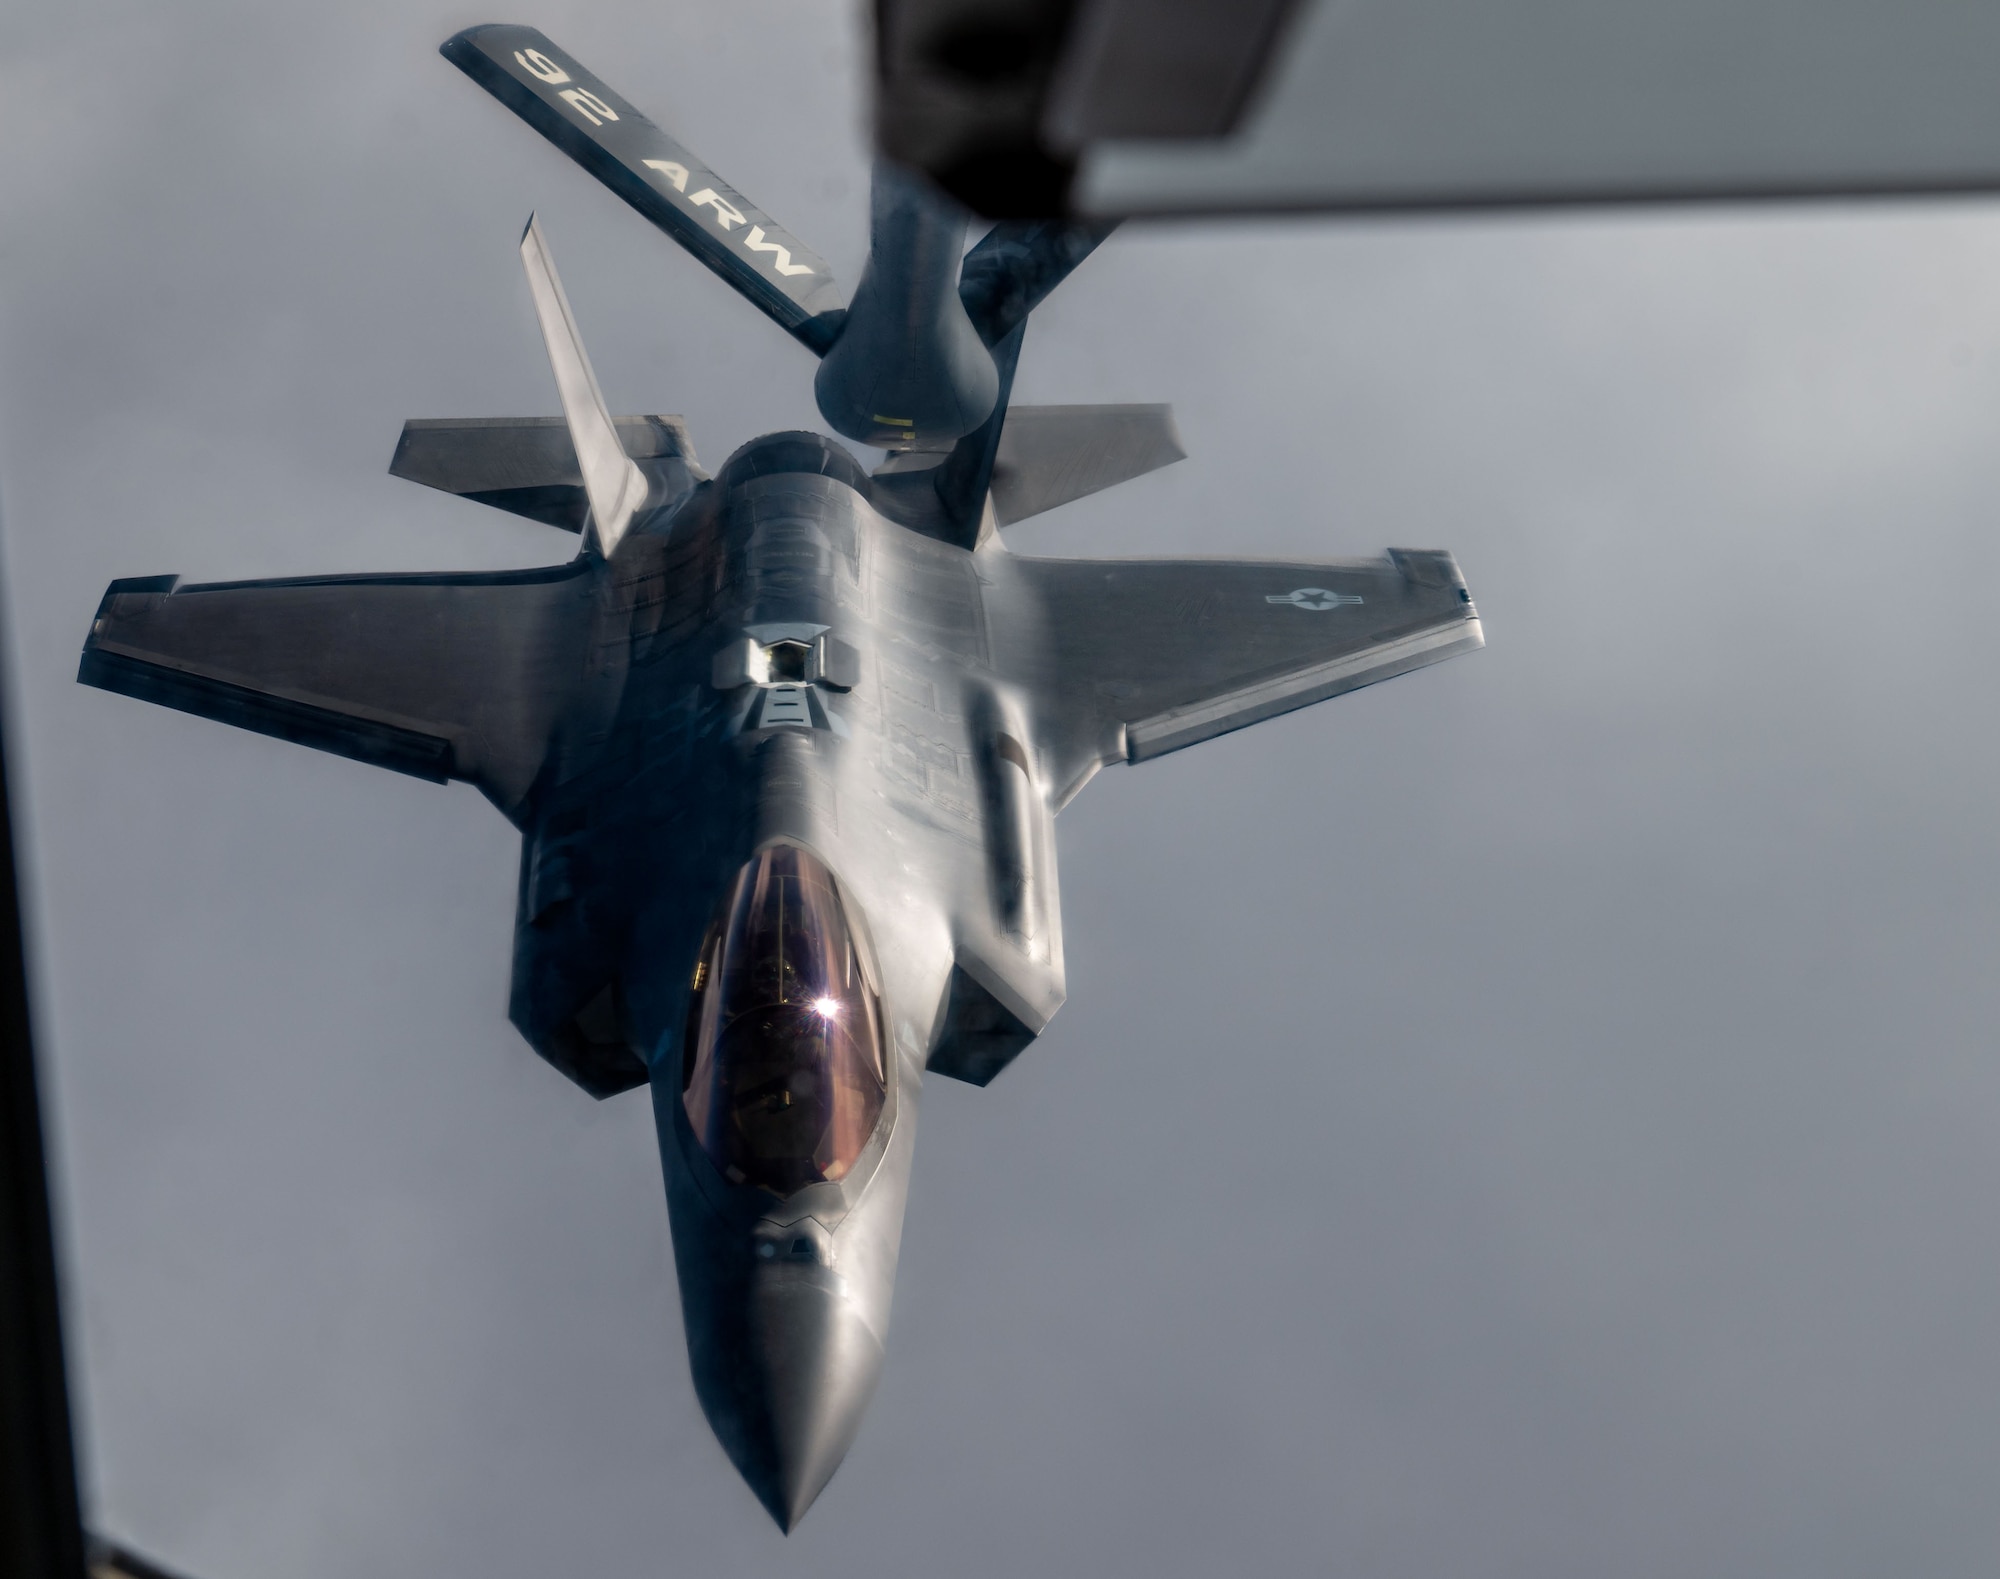 A U.S. Air Force F-35 Lighting II from Hill Air Force Base prepares to receive fuel from a KC-135 Stratotanker from Fairchild Air Force Base, Dec. 12, 2022. Crew members from Fairchild conducted an air refueling mission to enhance mission readiness for both the KC-135 and F-35 crews. (U.S. Air Force photo by Airman 1st Class Stassney Davis)